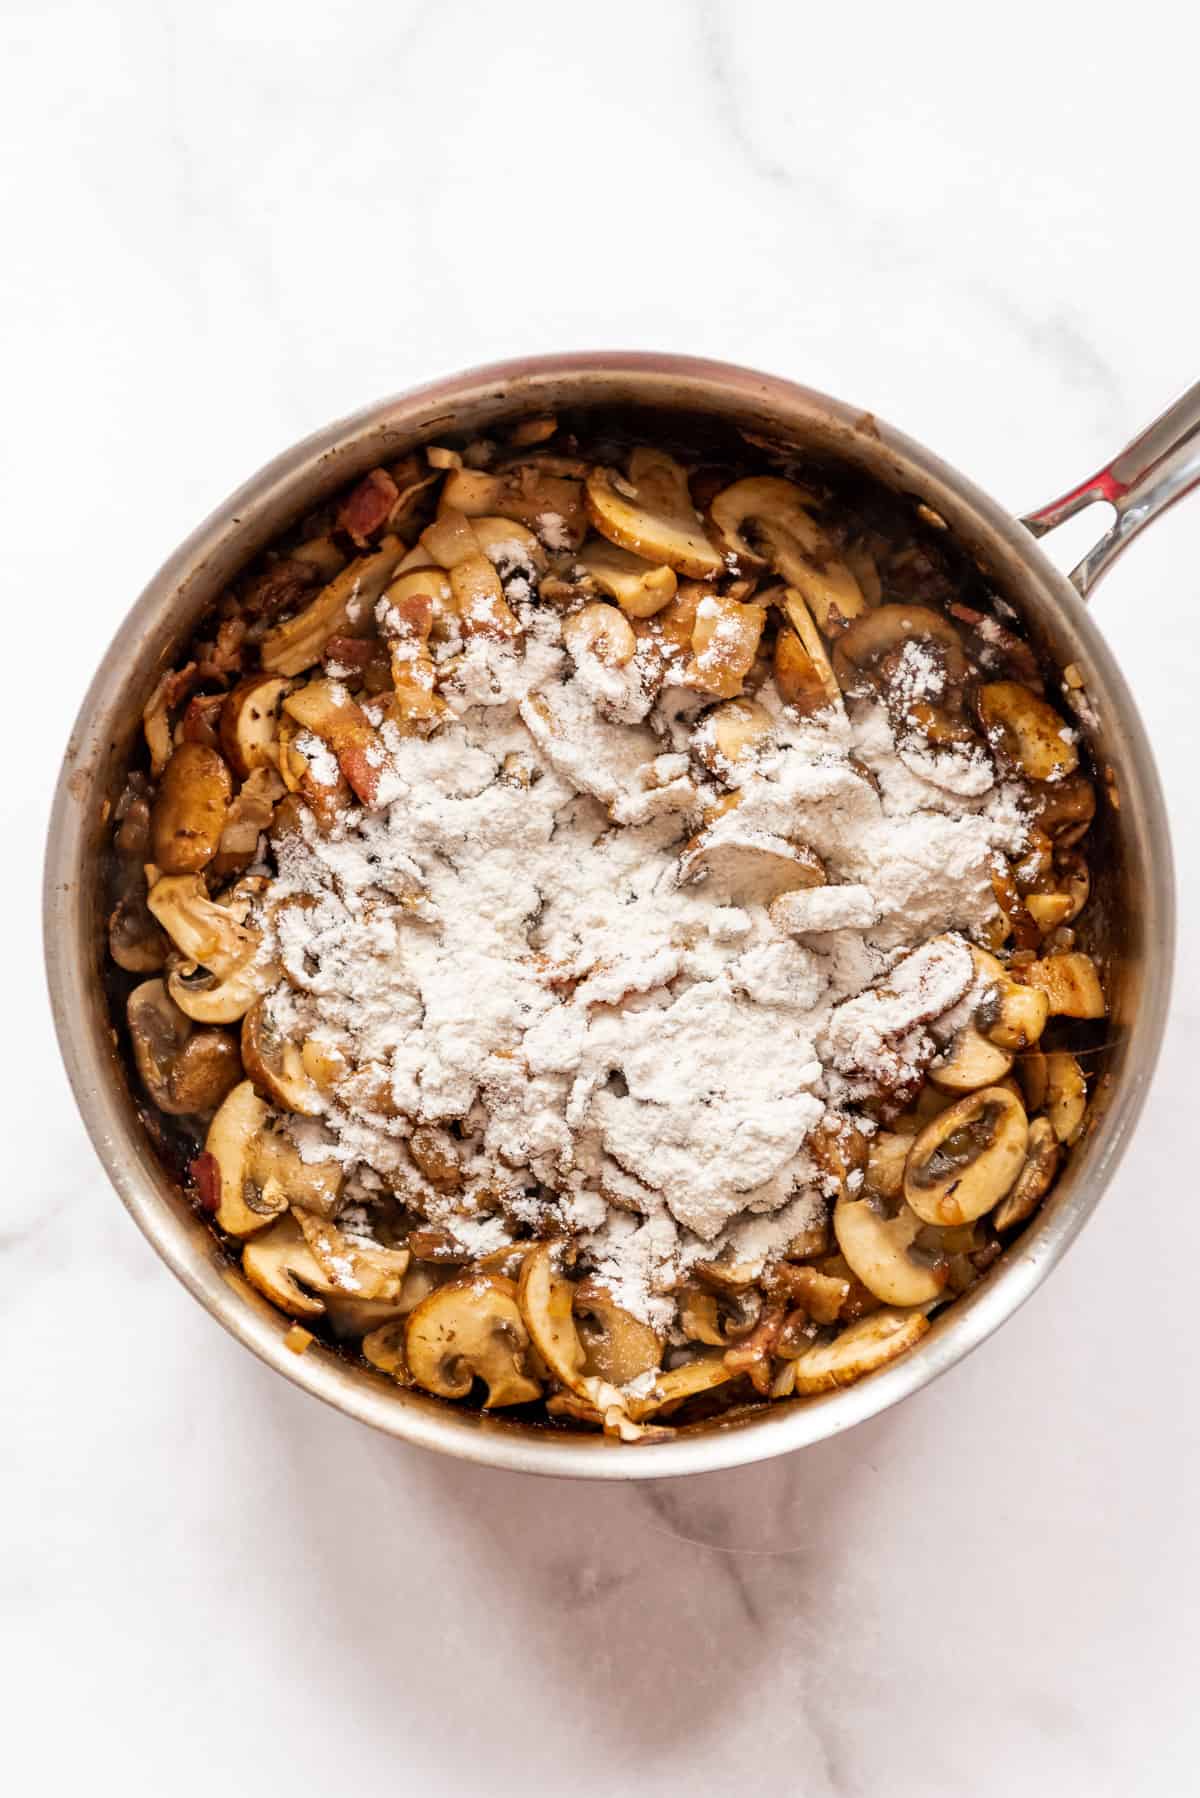 Flour sprinkled over sauteed mushrooms and onions in a pan.